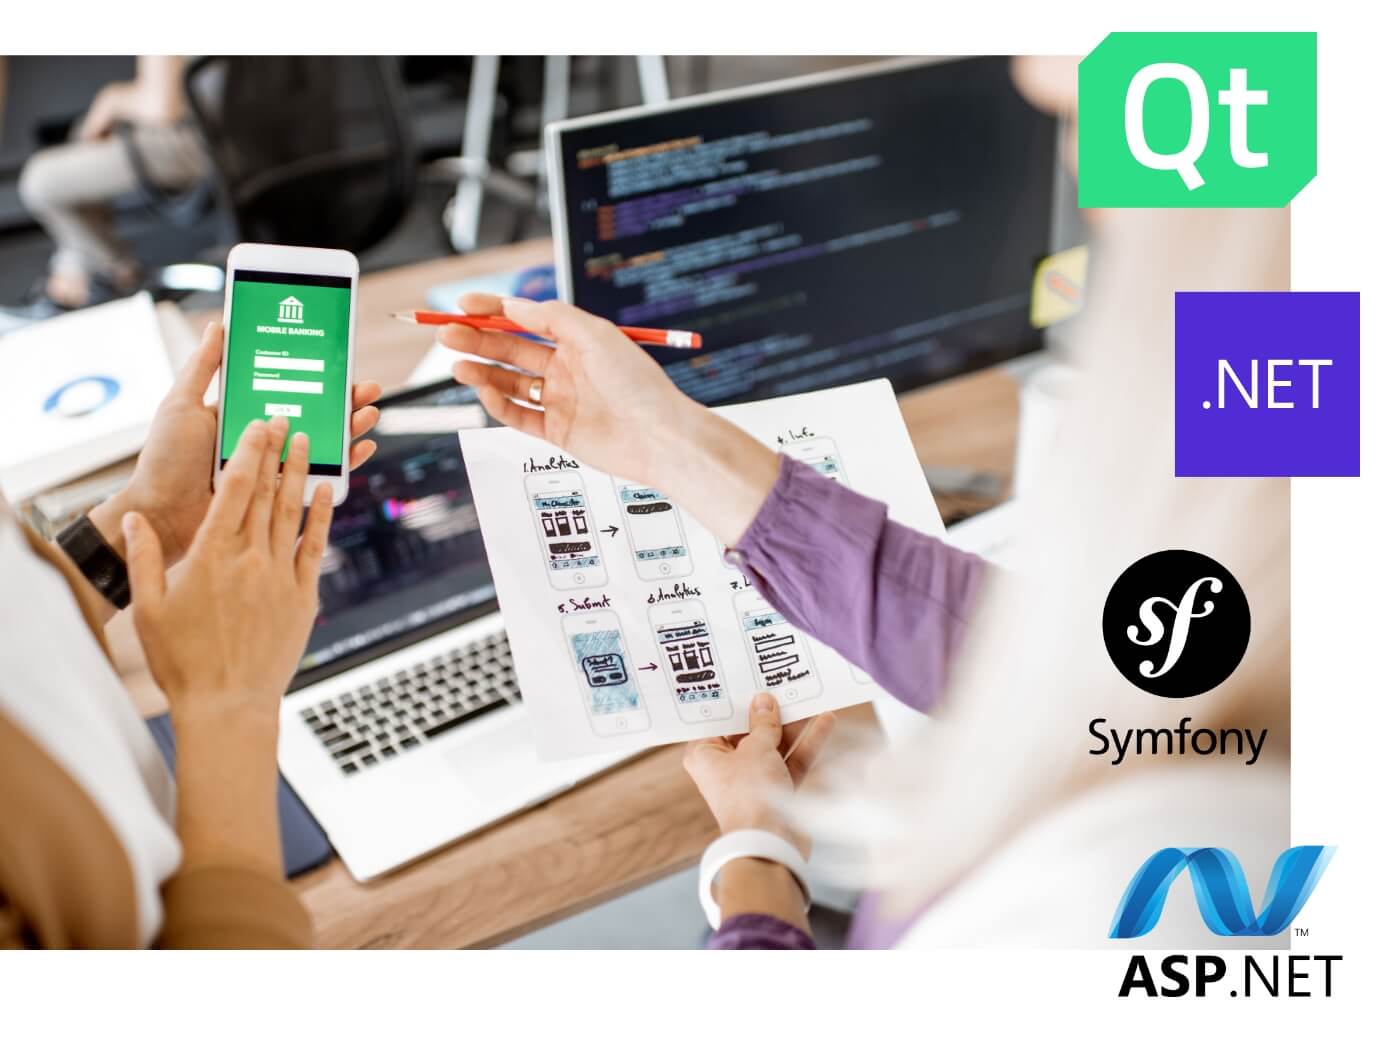 App development with the technologies of Qt, .NET, Symfony and ASP.NET